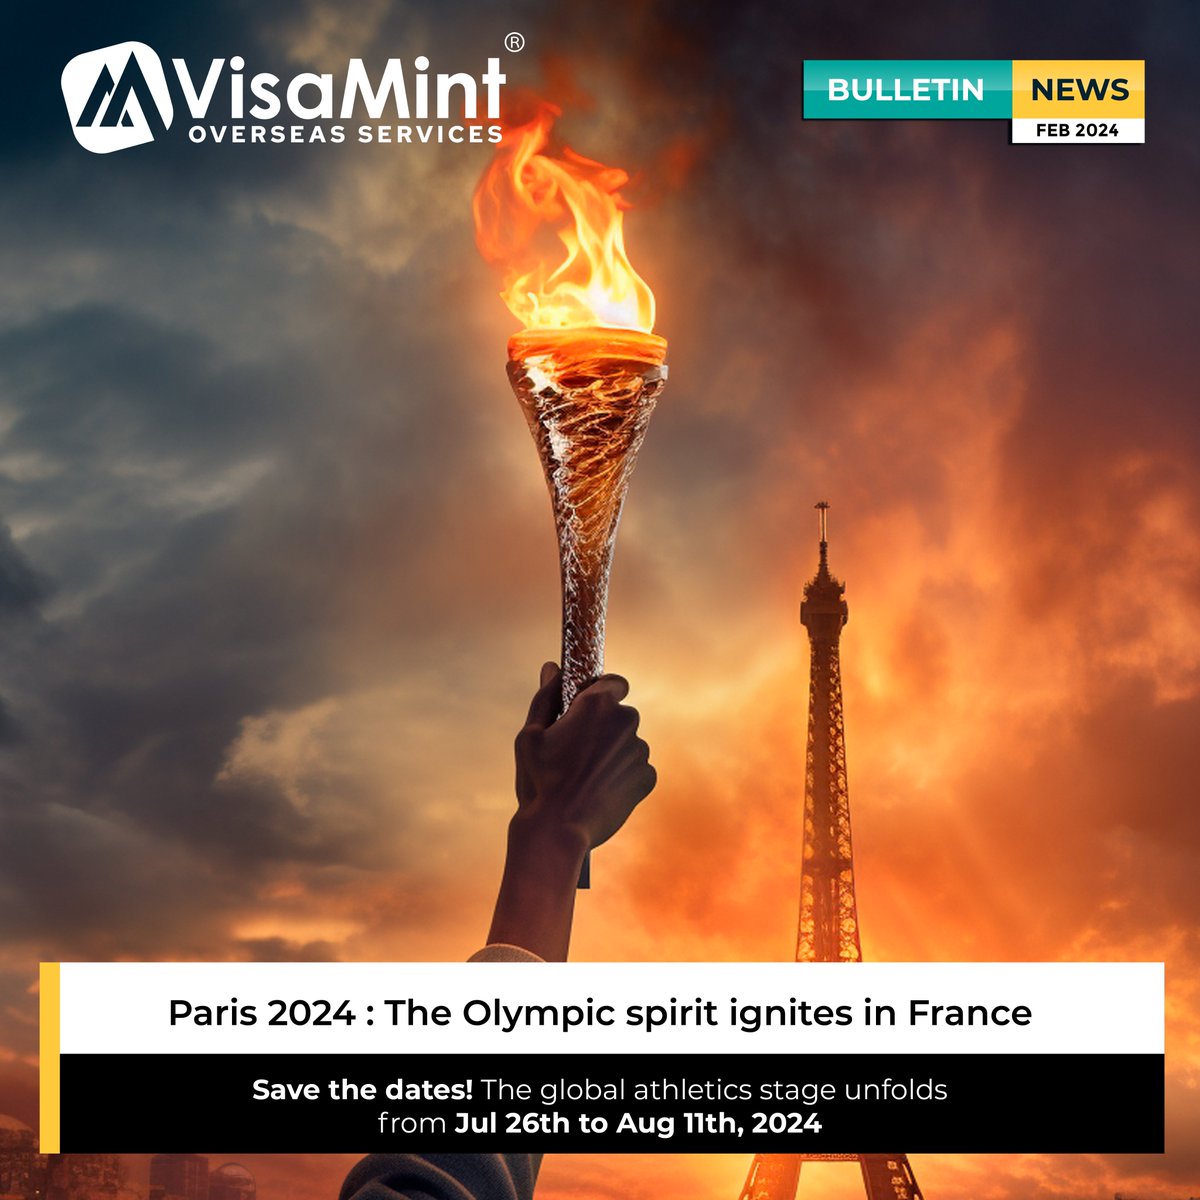 France to host Olympics 2024
International Sports Event will be held from Jul 26th to Aug 11th, 2024 in Paris

#Paris2024 #SportsExtravaganza #OlympicsInFrance #ParisOlympics #OlympicGames #RoadtoParis2024 #France2024 #OlympicSpirit #OlympicHost #ParisianGames #CountdownToParis